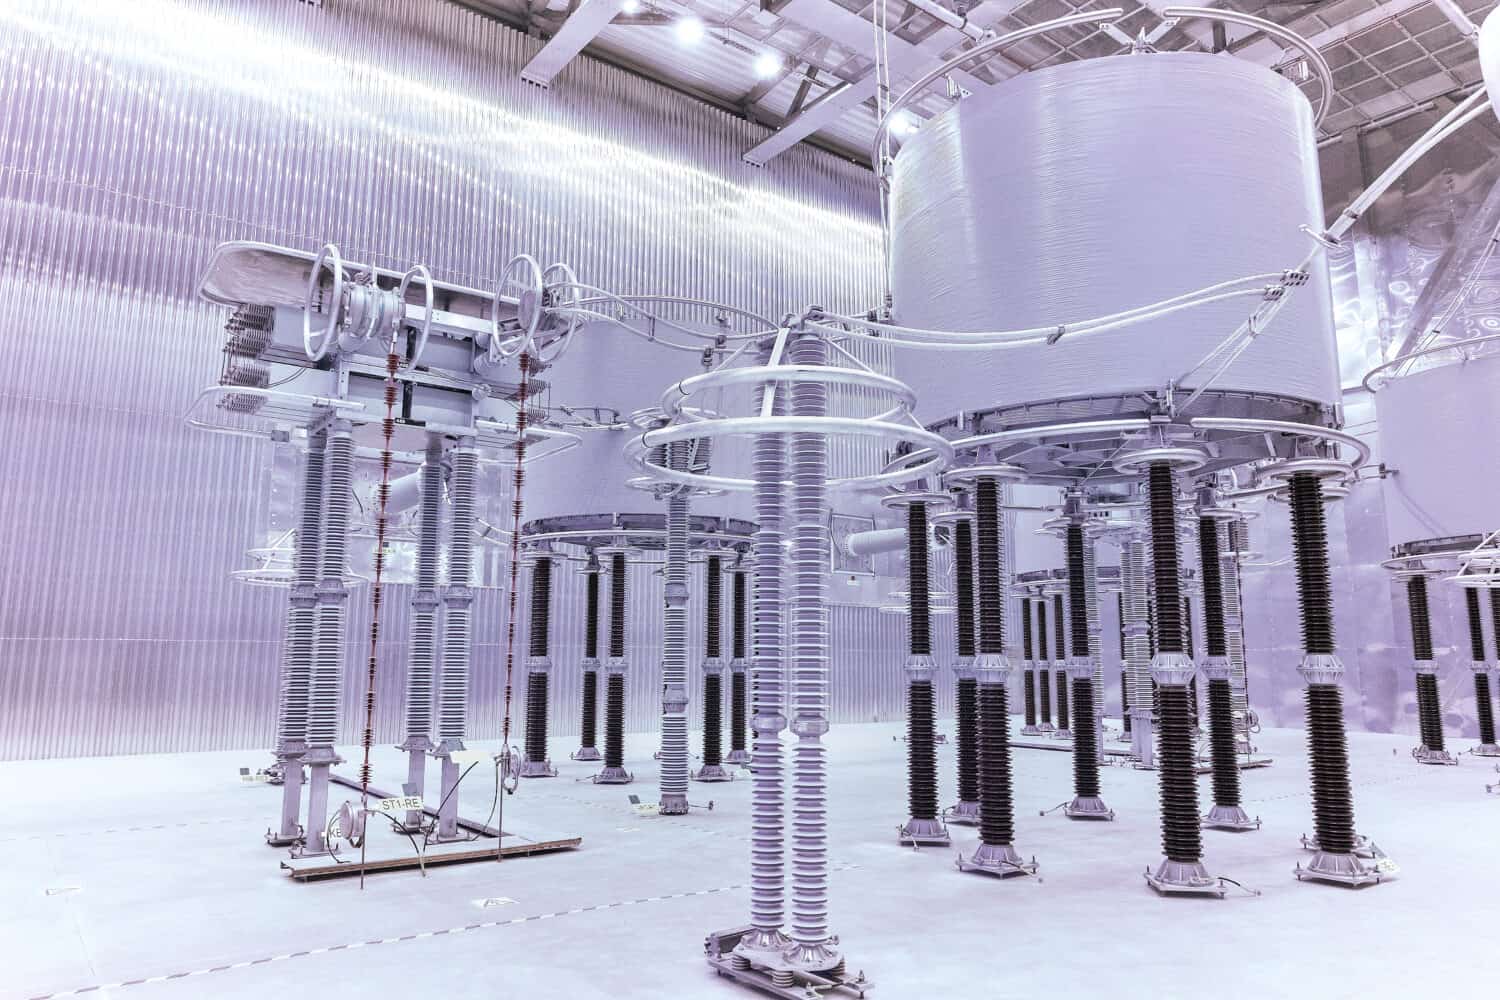 Inside high voltage direct current HVDC station. Electrical equipment in the closed substation looks futuristic.